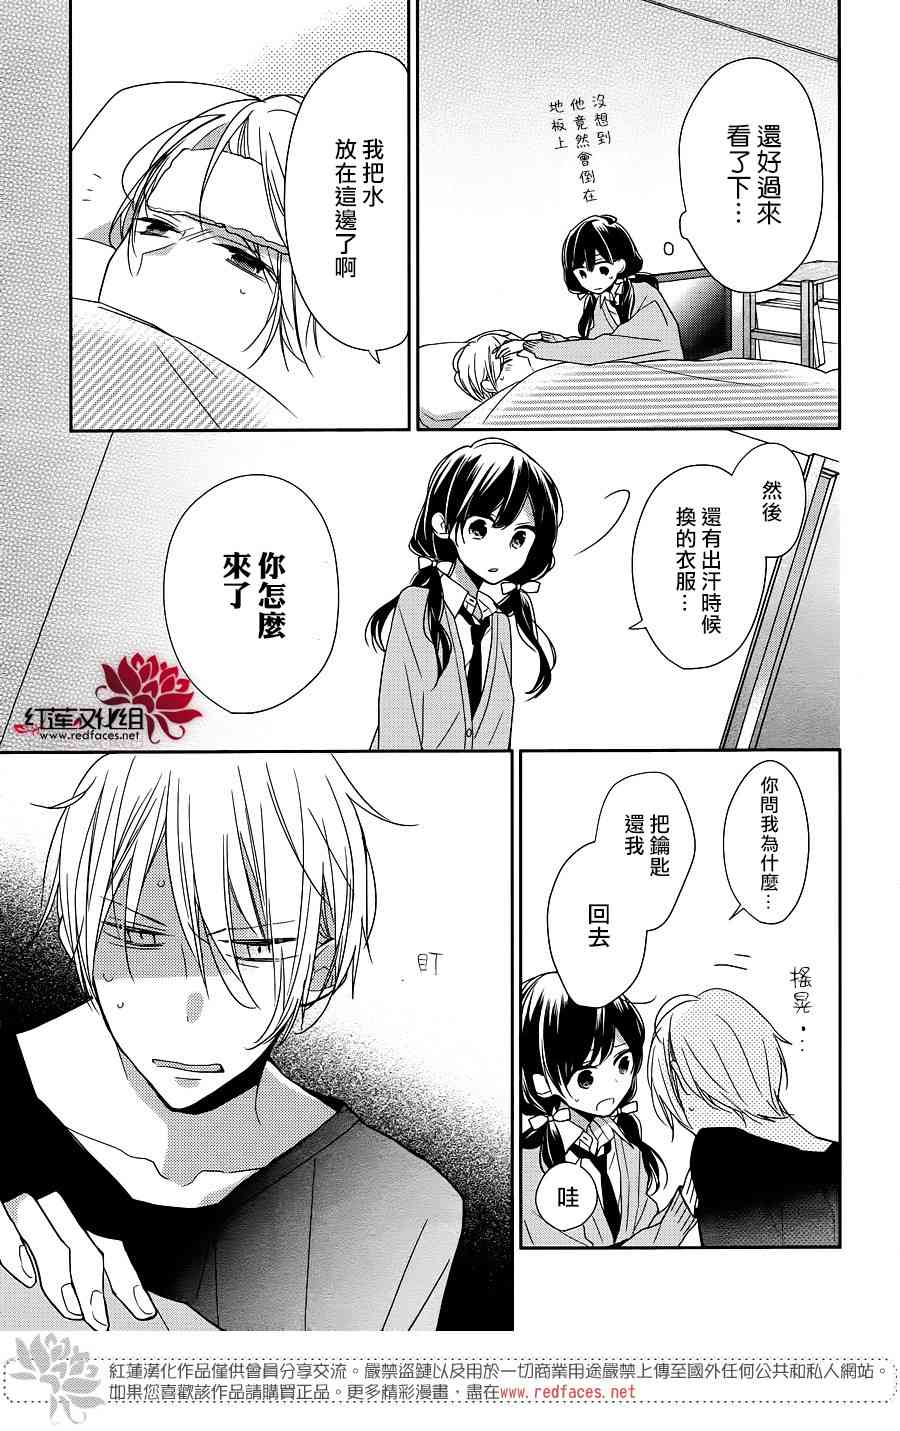 If given a second chance - 9話 - 3